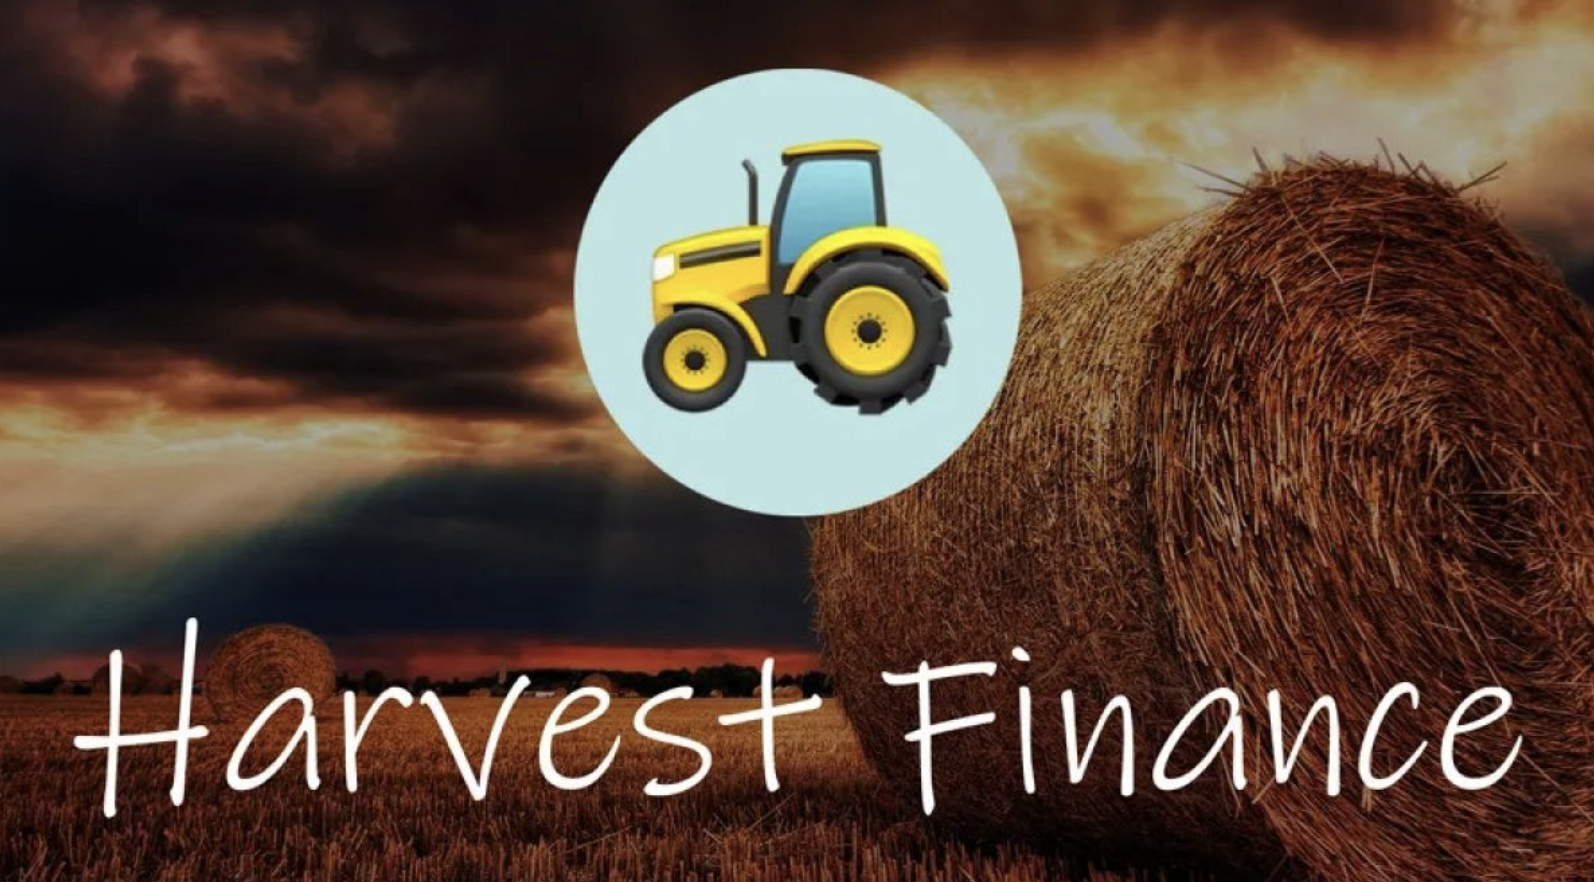 What is Harvest Finance Coin?